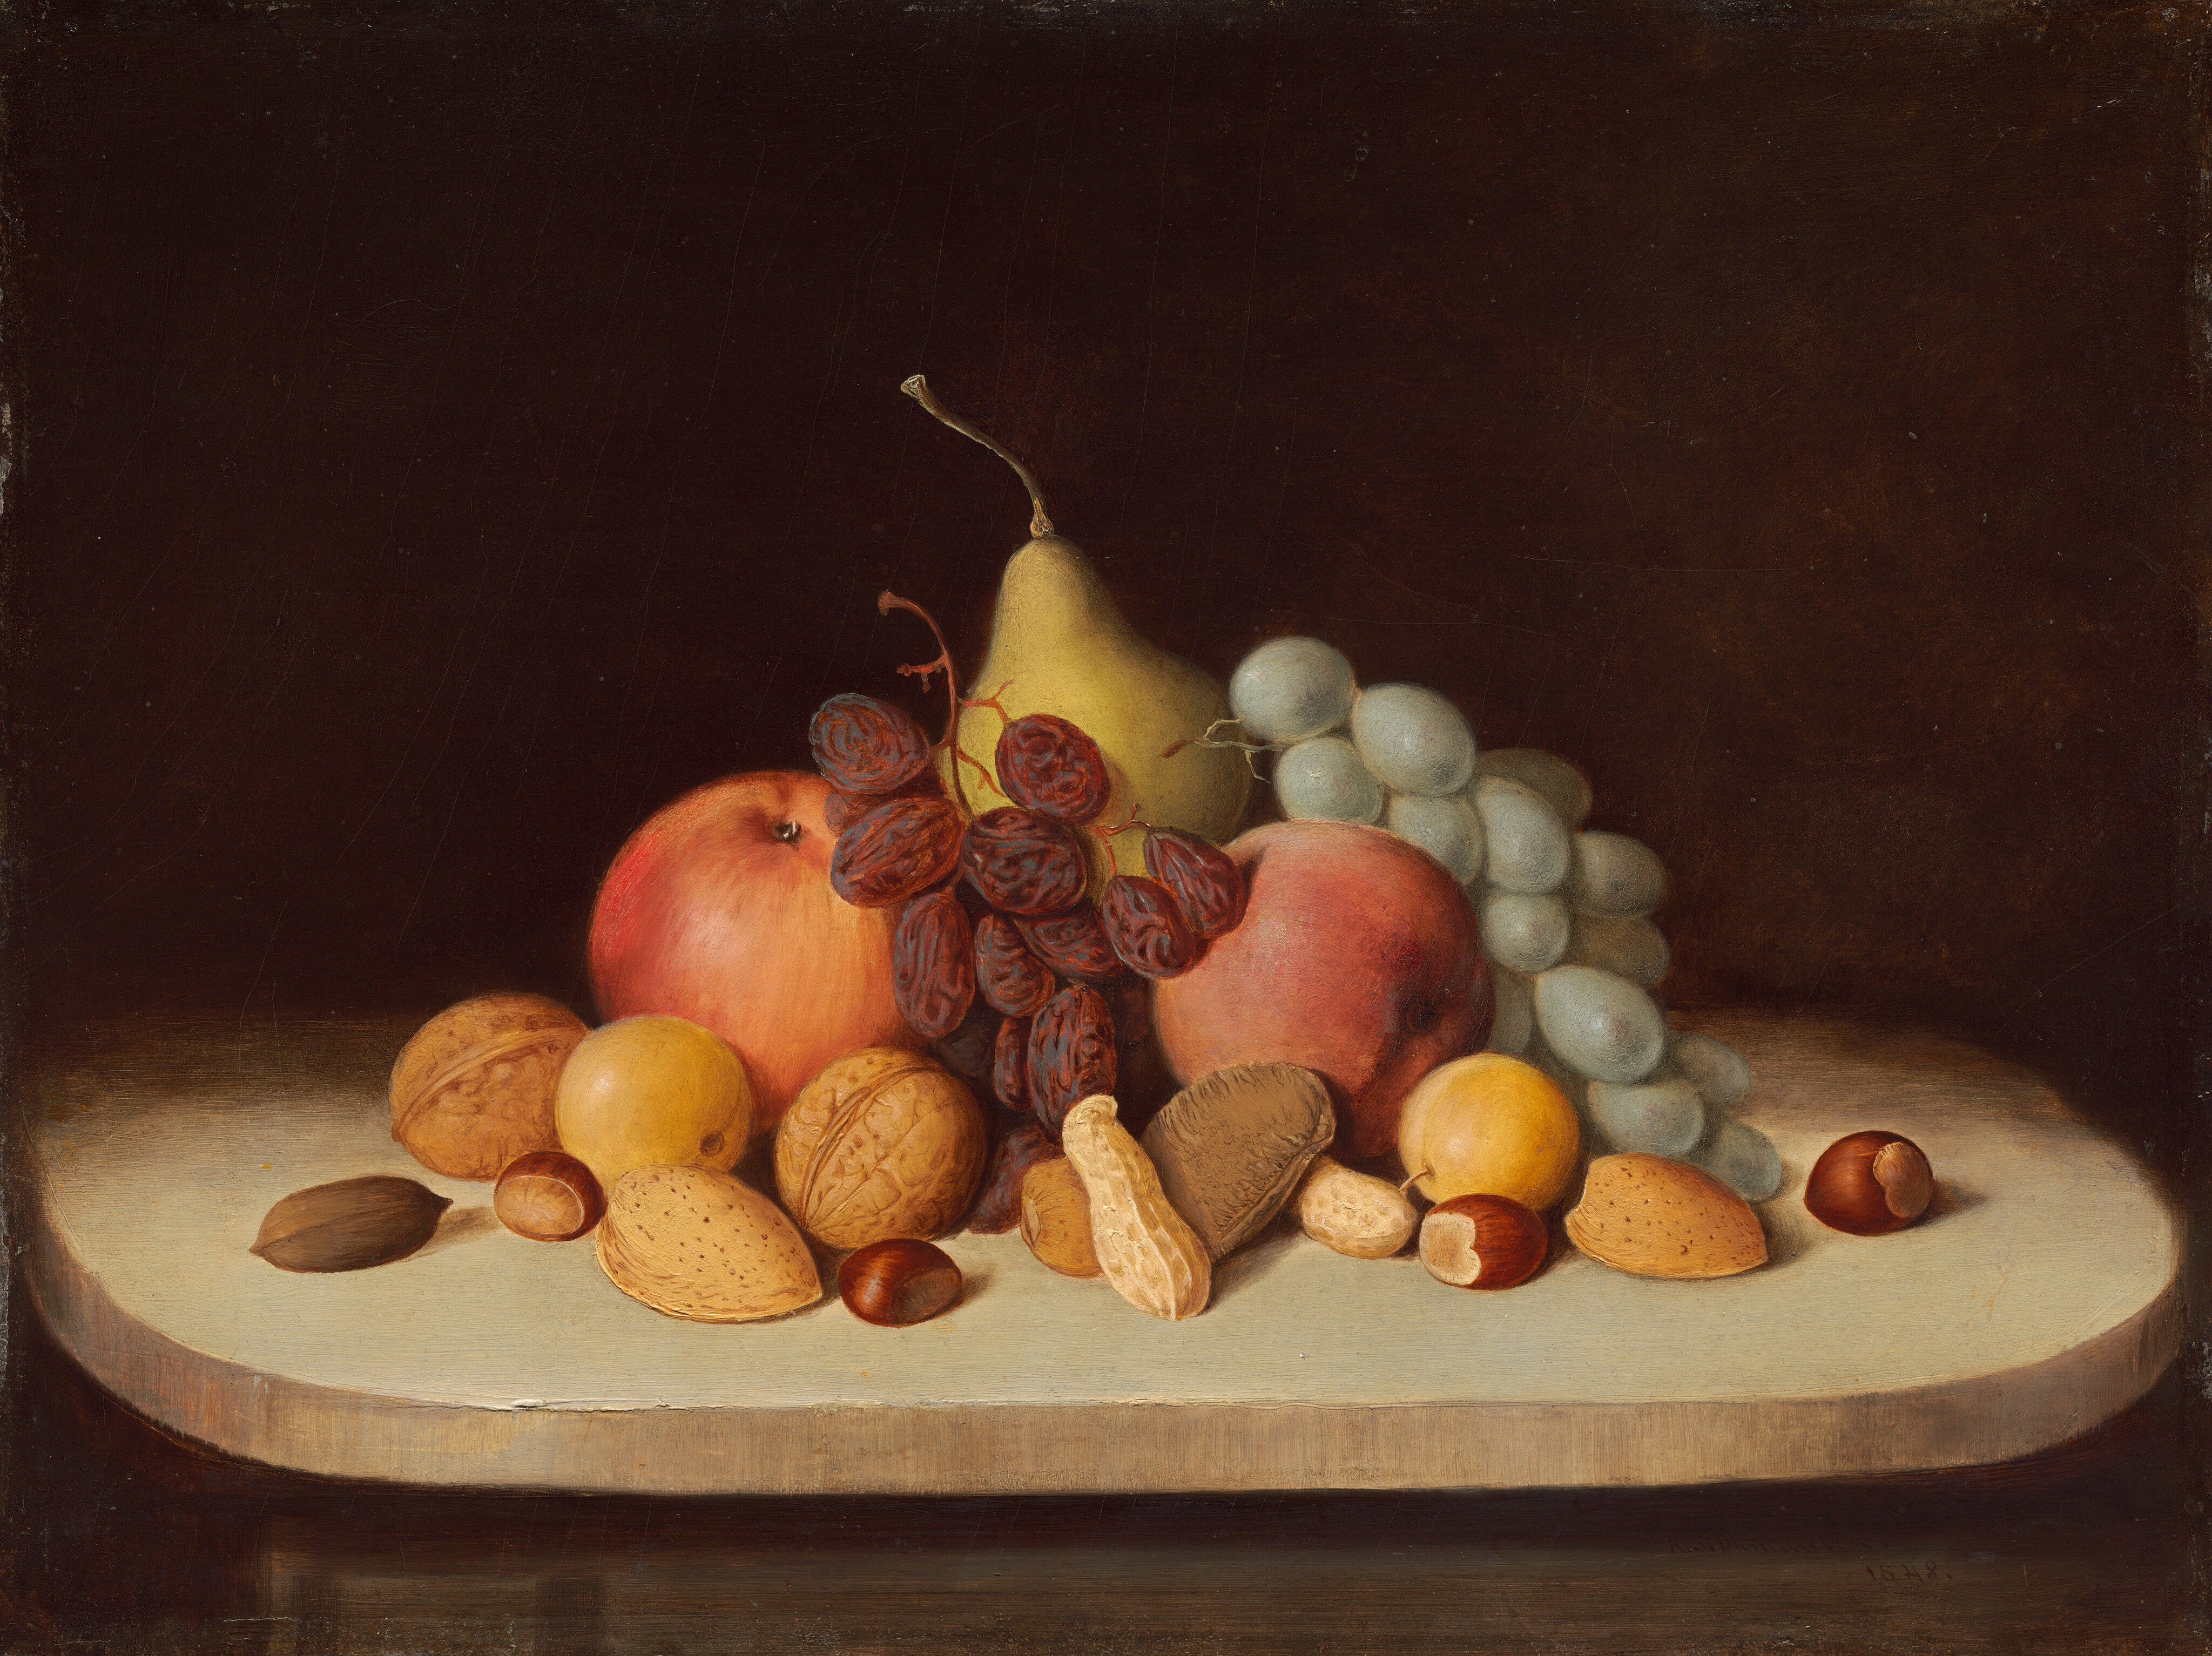 Still Life with Fruit and Nuts by Robert Duncanson - 1848 - 30.48 x 40.64 cm National Gallery of Art